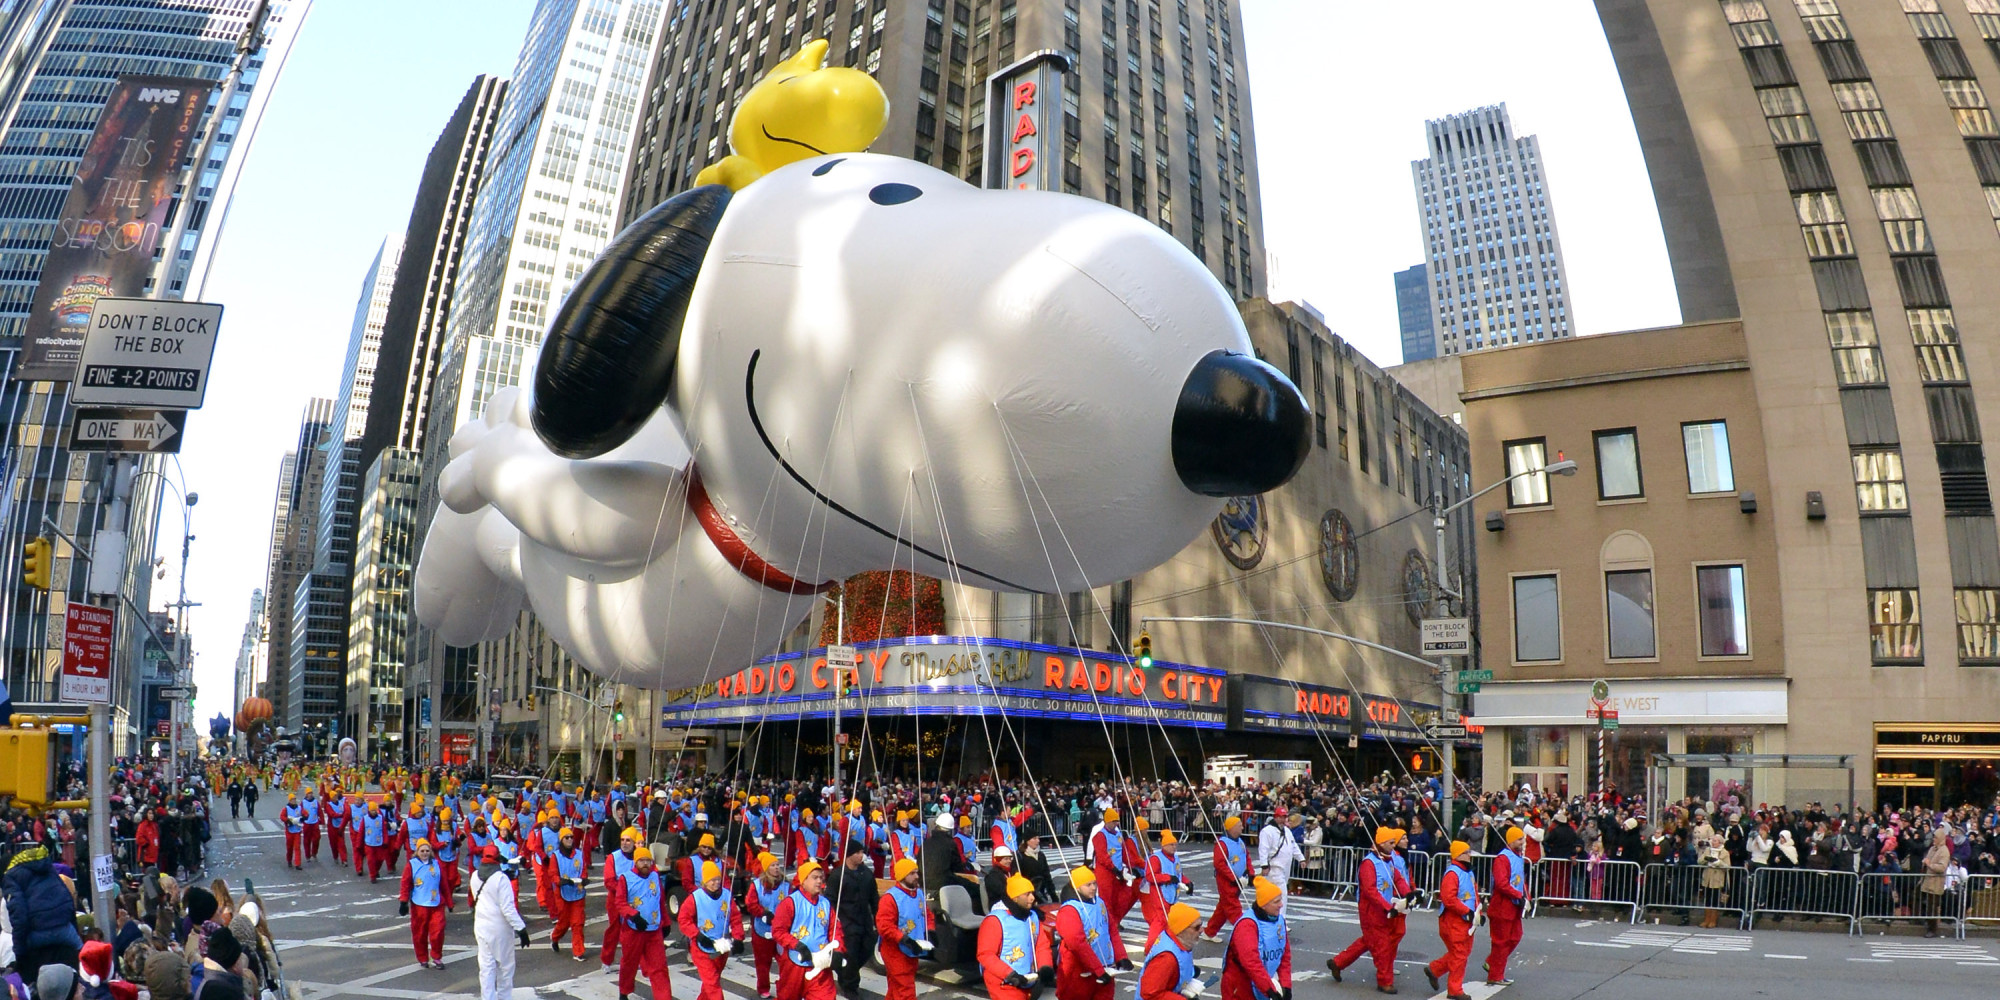 NEW YORK, NY - NOVEMBER 28: (EDITOR'S NOTE: Image was shot with a fisheye lens) Snoopy makes his way down Avenue of the Americas during the 87th Macy's Thanksgiving Day Parade on November 28, 2013 in New York City. (Photo by Neilson Barnard/Getty Images)